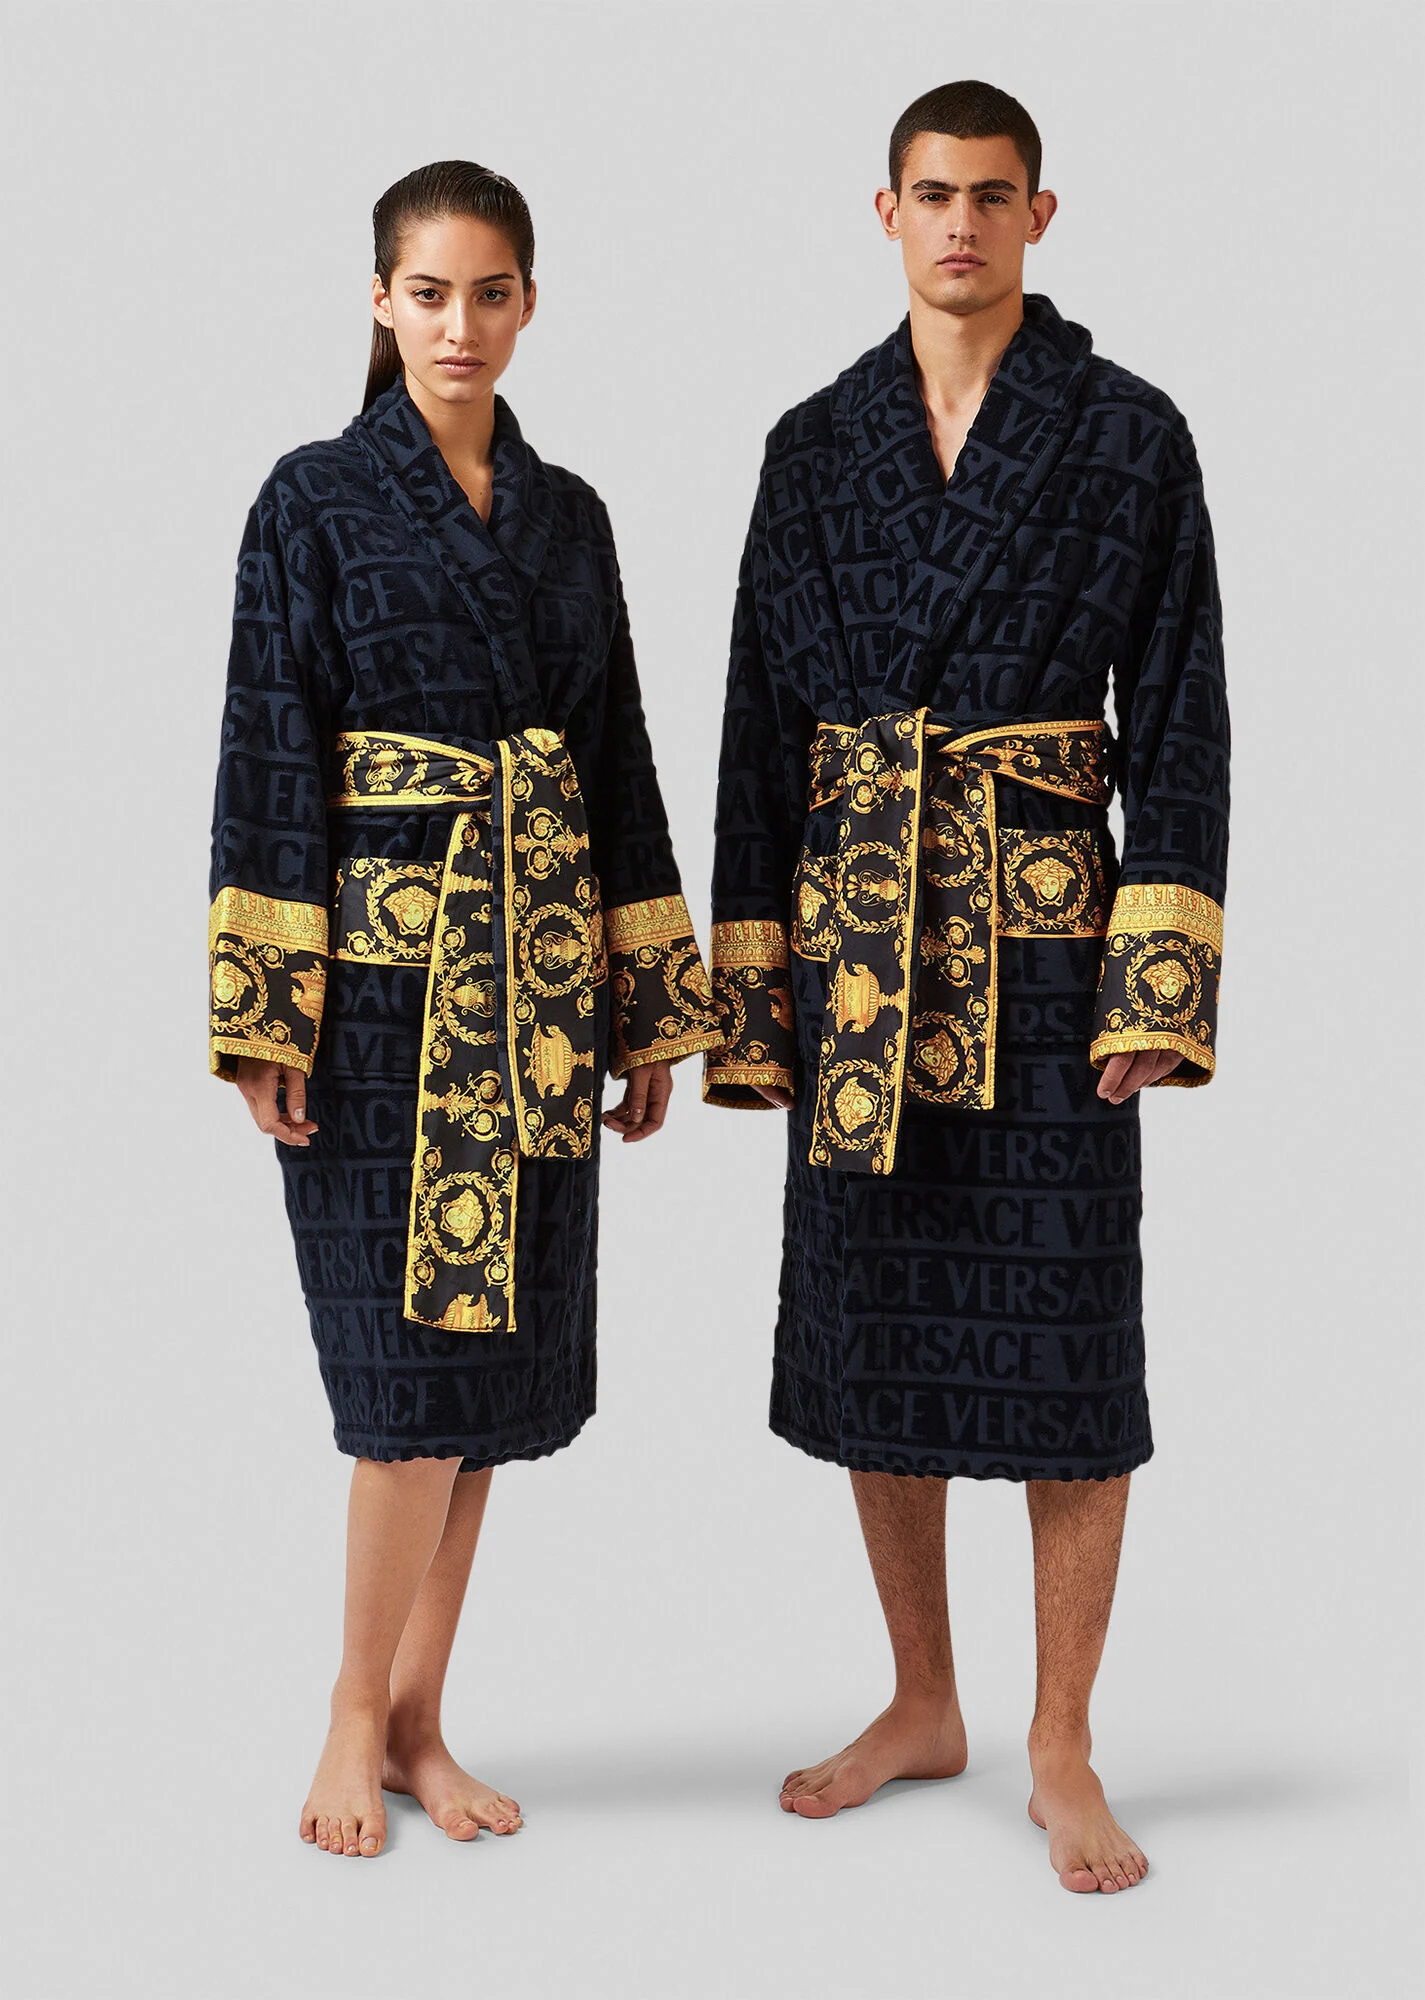 The Versace Baroque Bathrobe Will Let You WFH Like A King